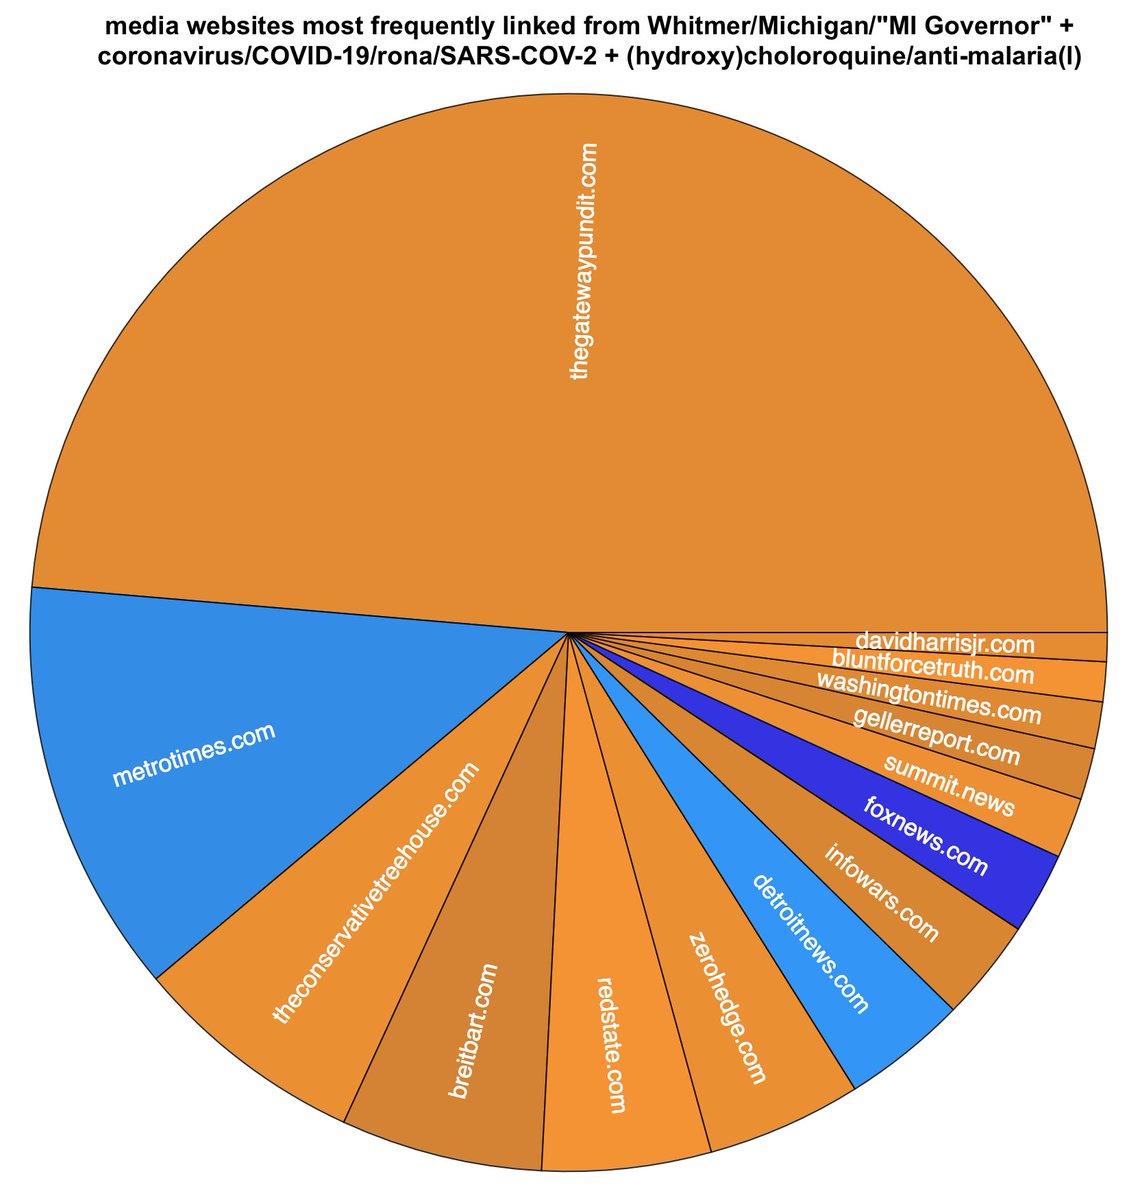 What media sources are linked from tweets mentioning coronavirus,  @GovWhitmer, and  #hydroxochloroquine? Other than two local newspapers, it's all right-wing media, with the largest share belonging to Gateway Pundit.